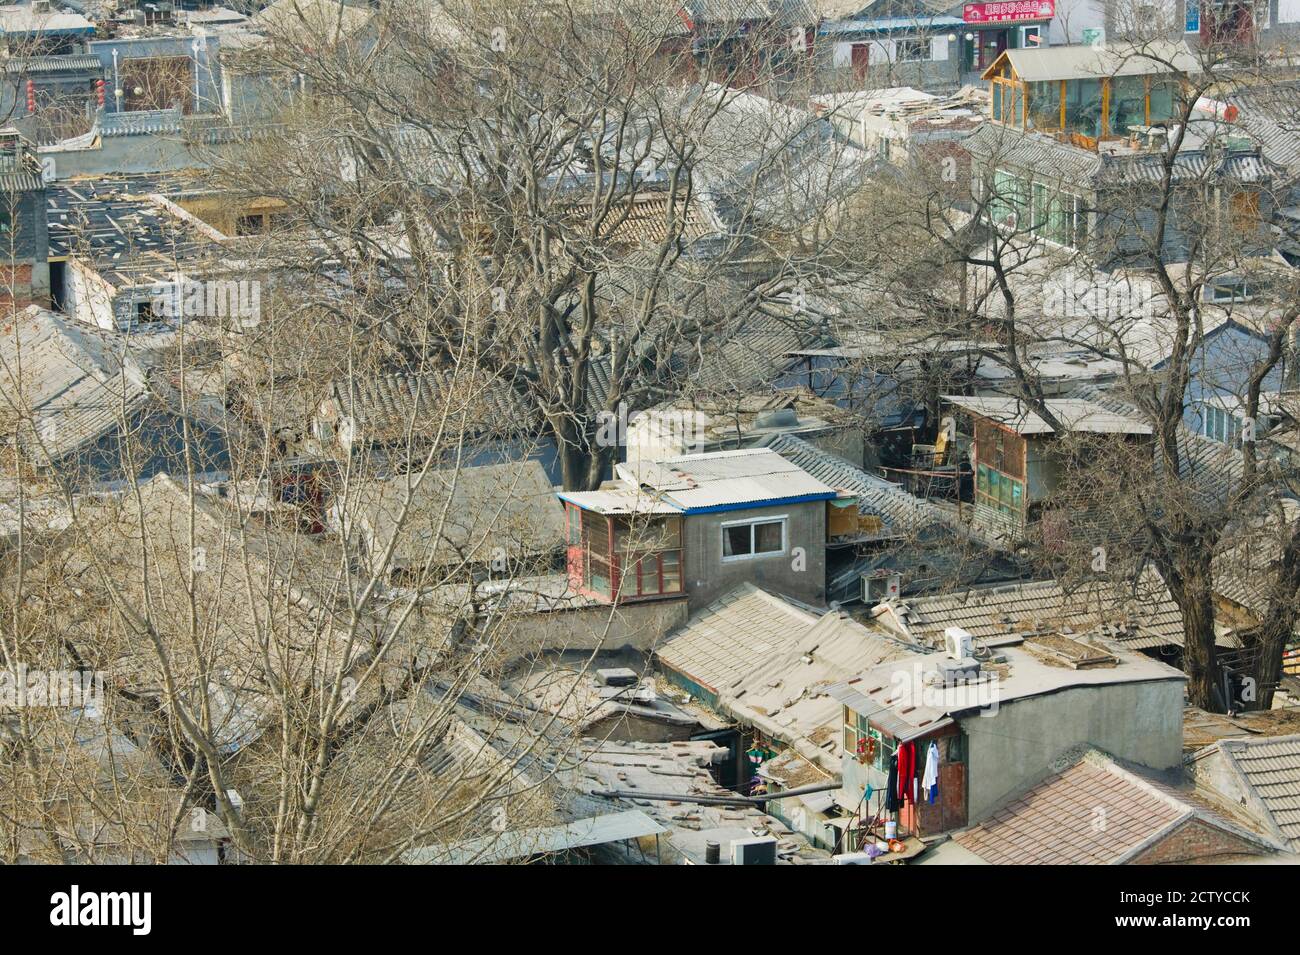 Rooftop view of traditional houses in Beijing Hutong area from atop Old Drum Tower, Dongcheng District, Beijing, China Stock Photo